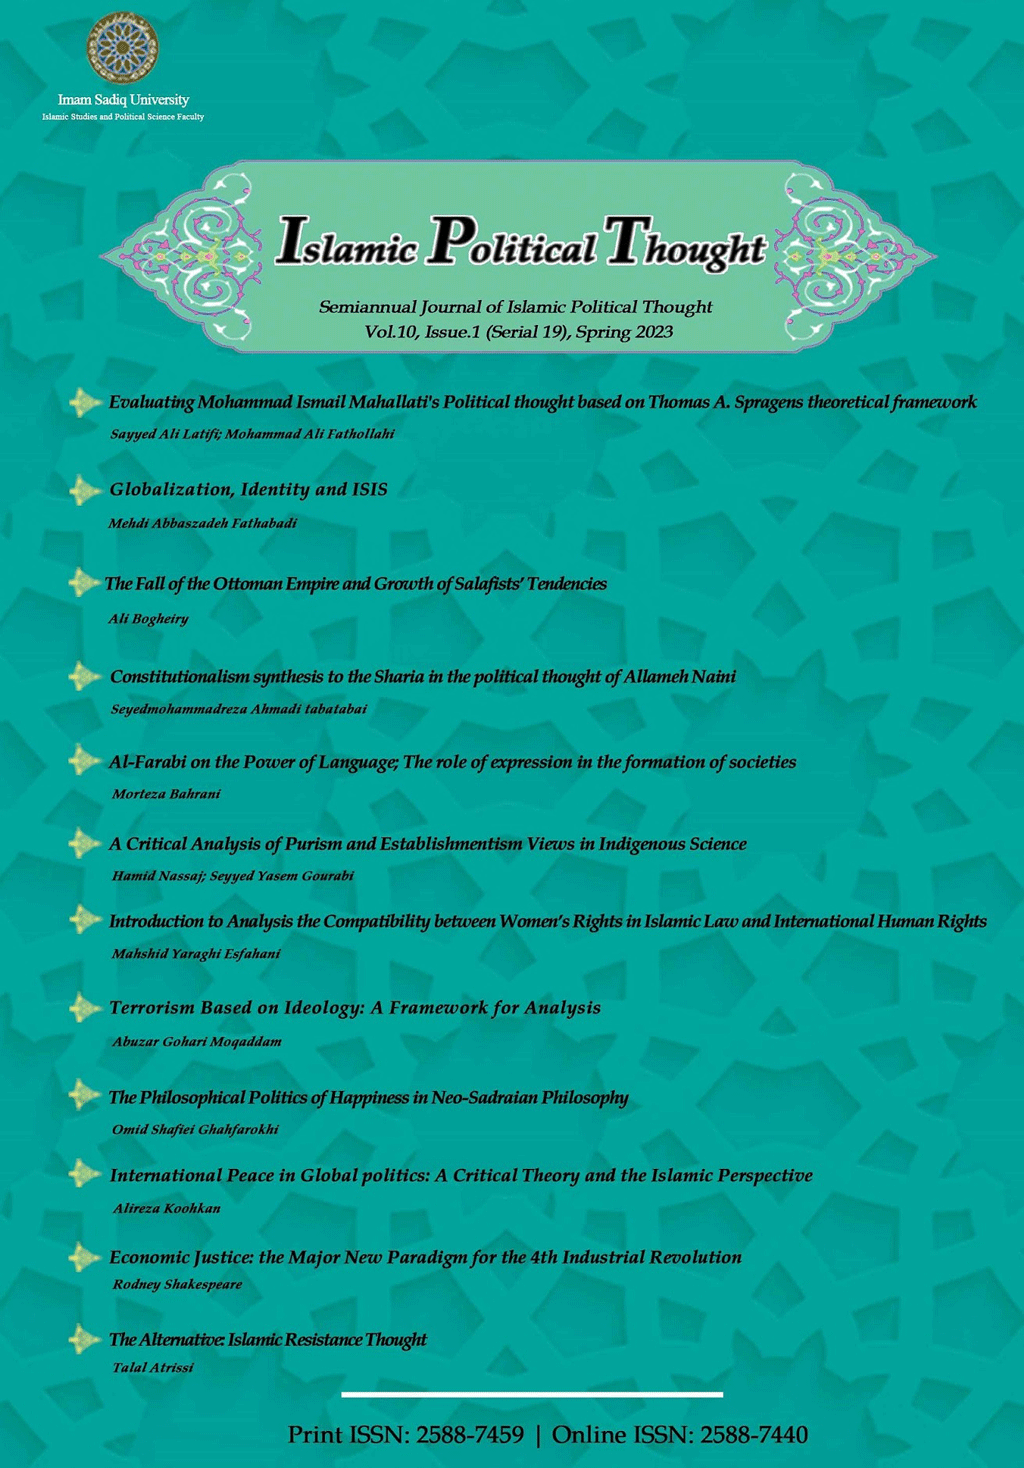 Islamic Political Thoughts - Fall 2018, Volume 5 - Number 2